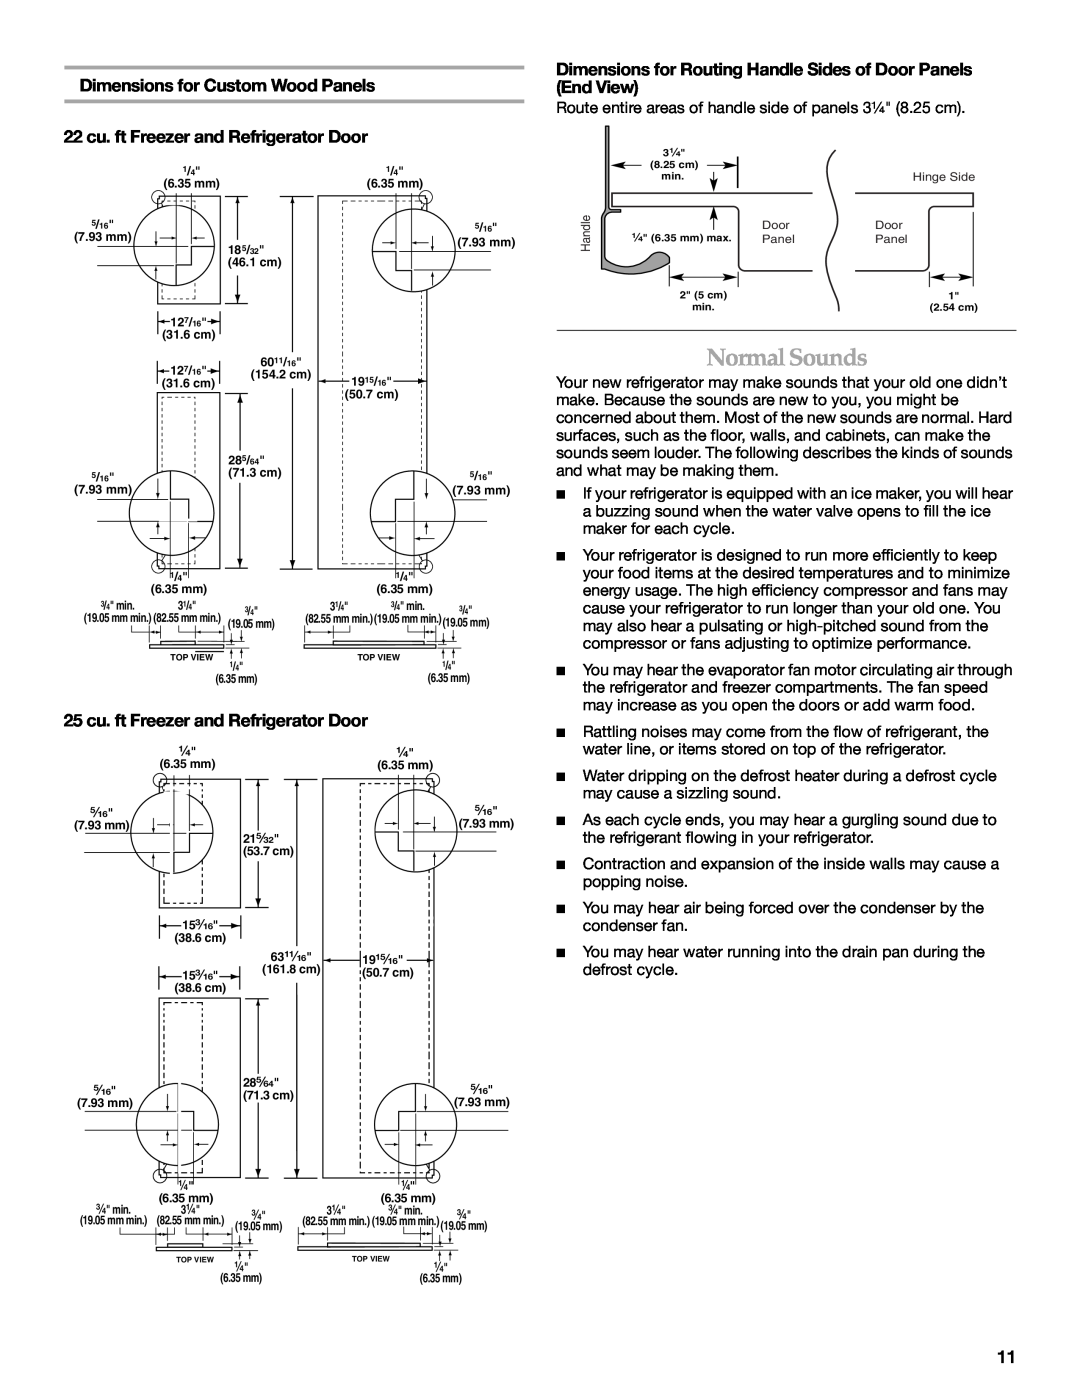 KitchenAid 2318581 manual Normal Sounds, Dimensions for Routing Handle Sides of Door Panels End View 